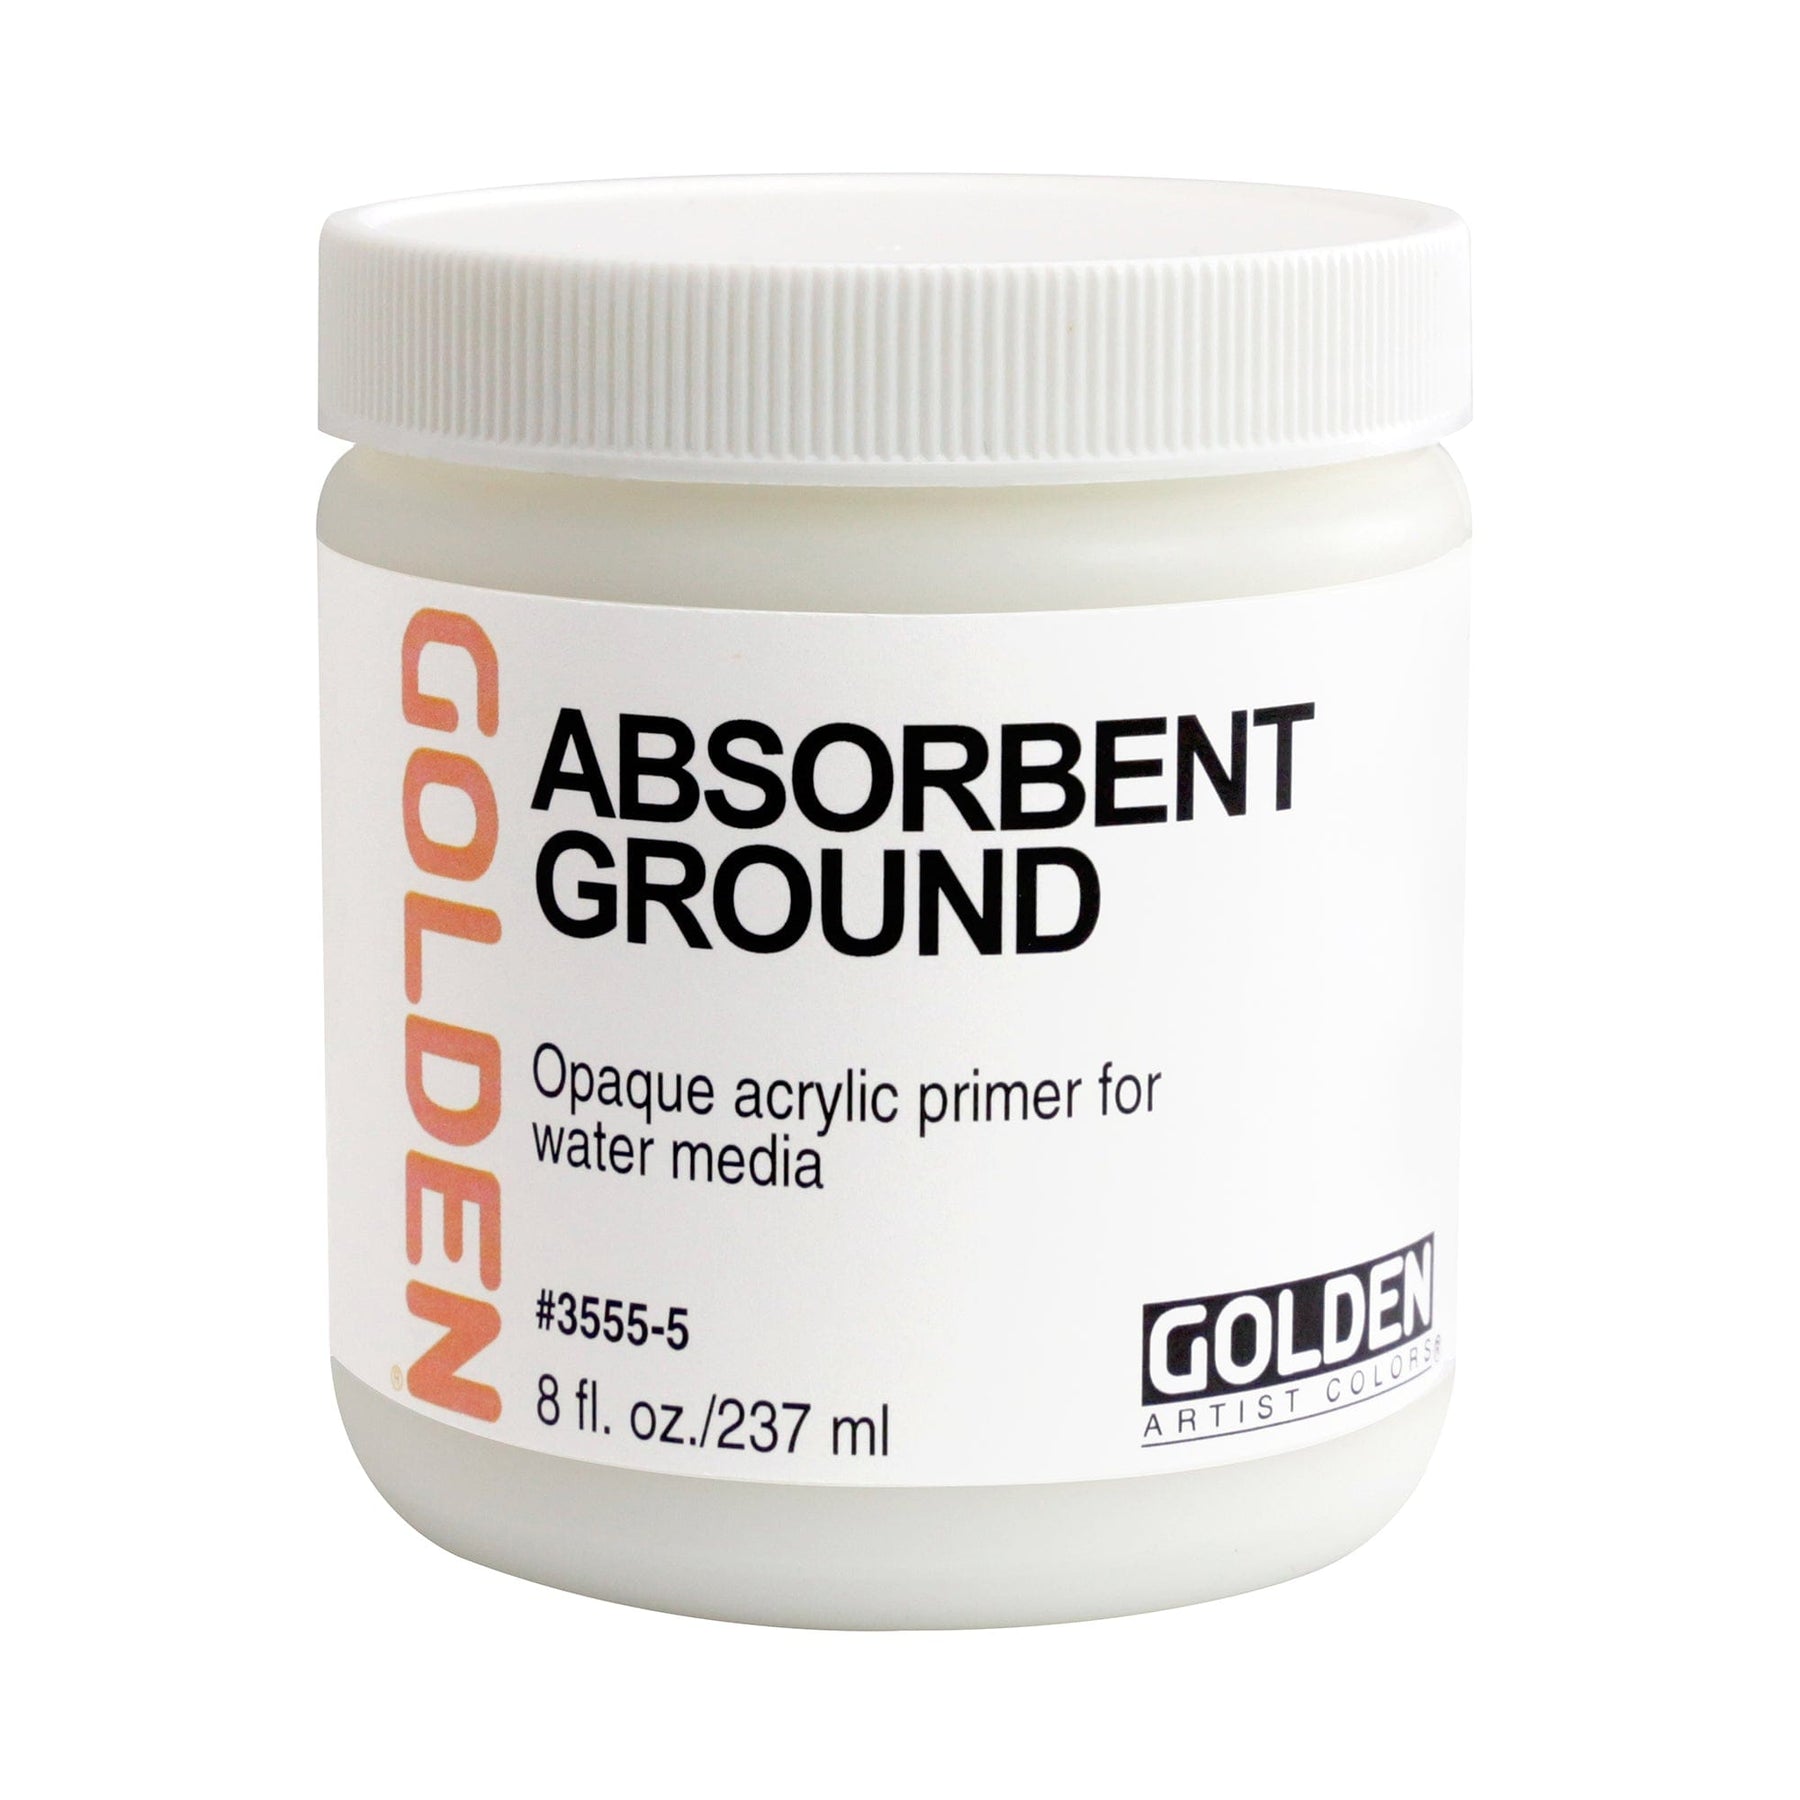 Absorbent Grounds